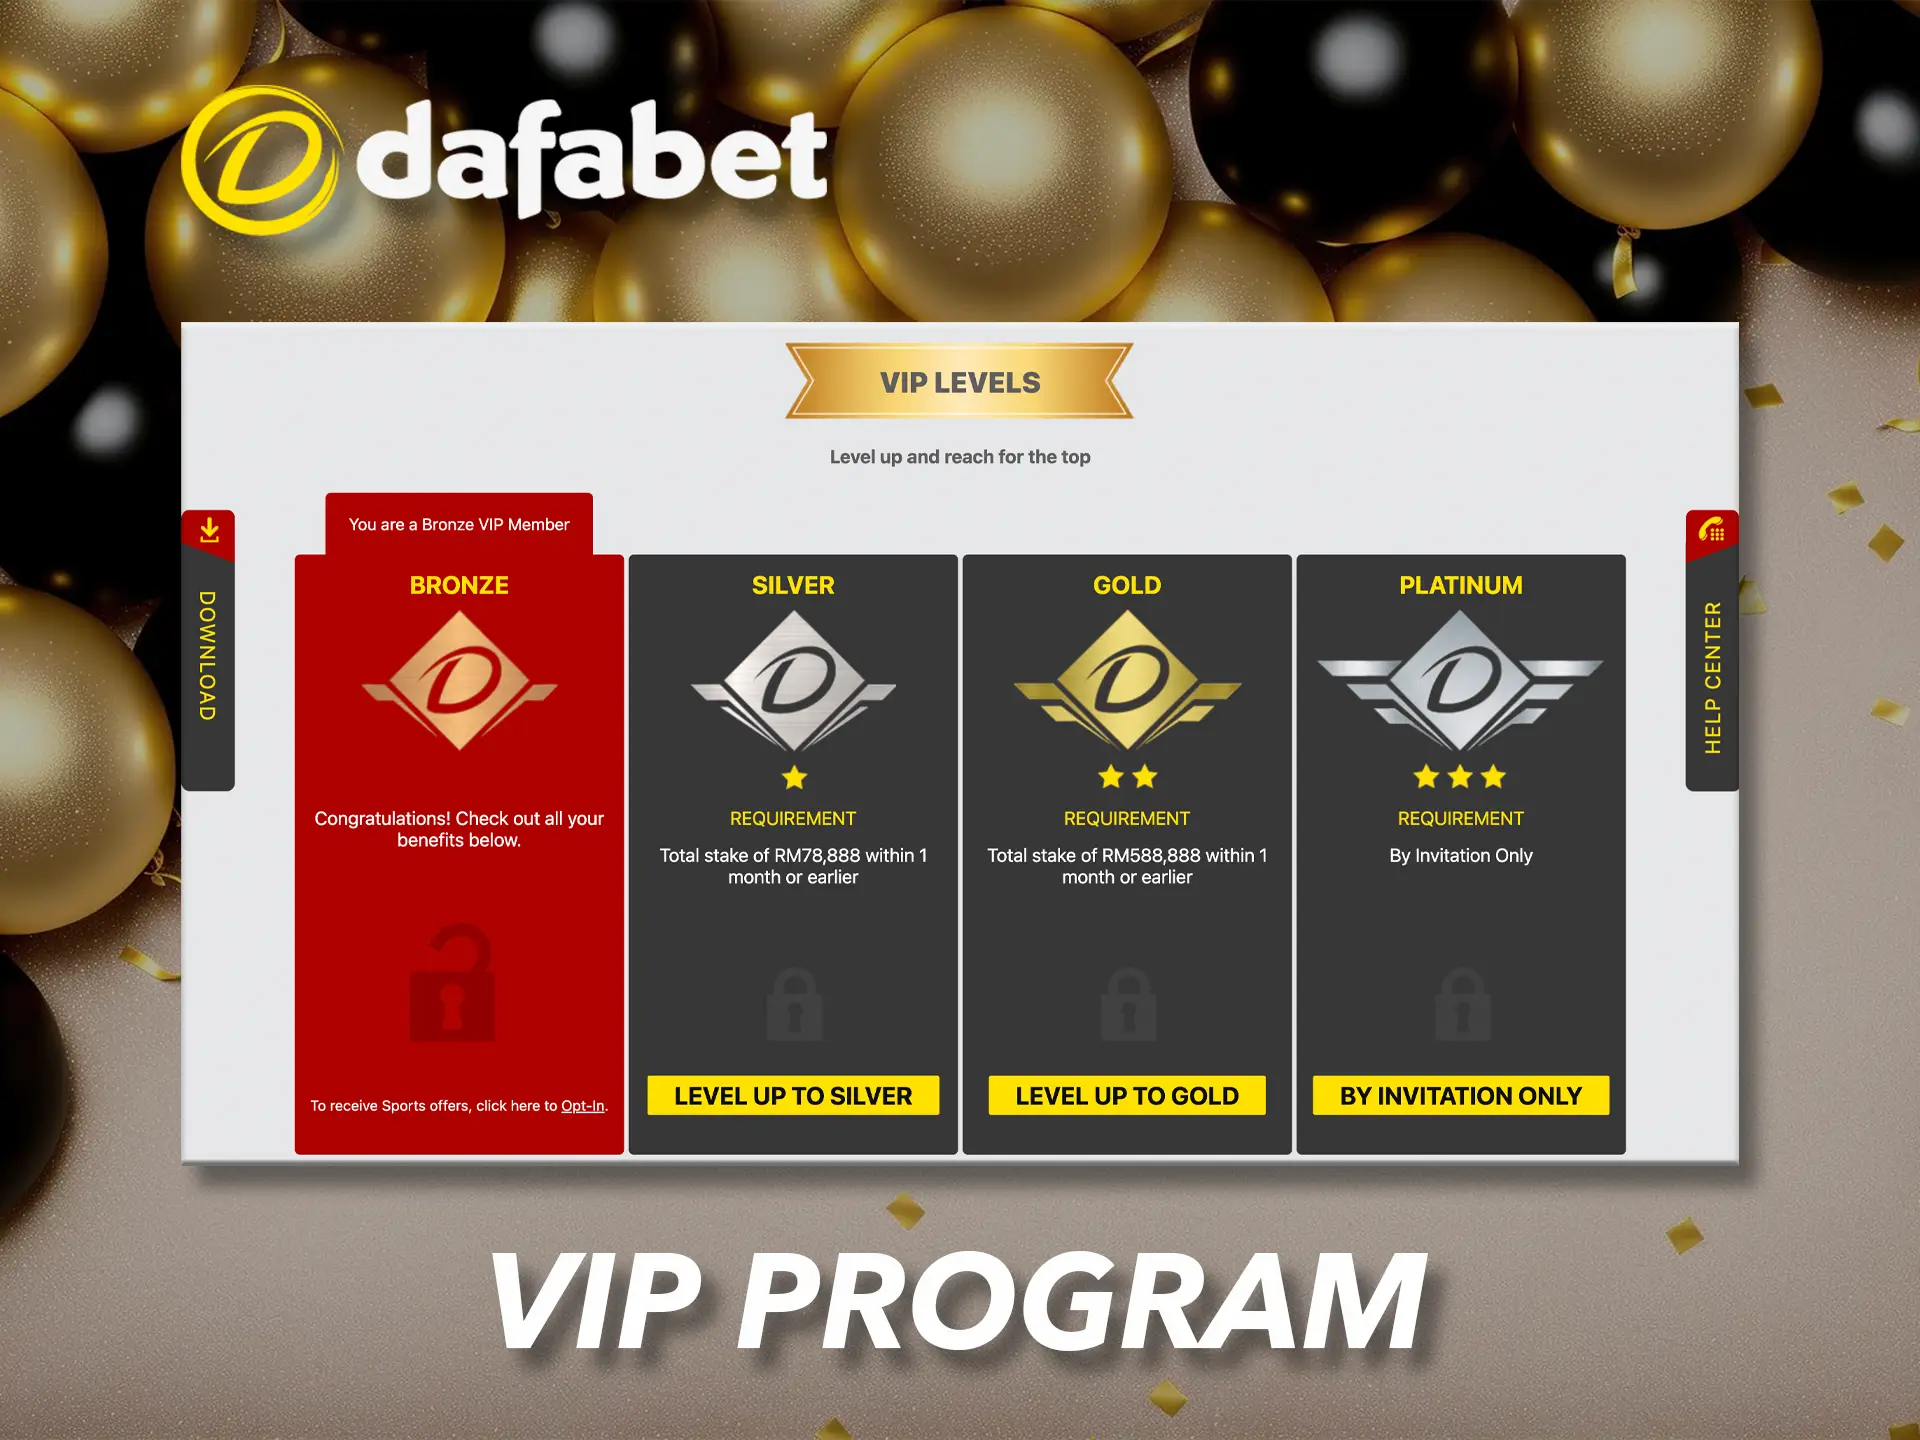 Upgrade your personal Dafabet account and receive guaranteed gifts.